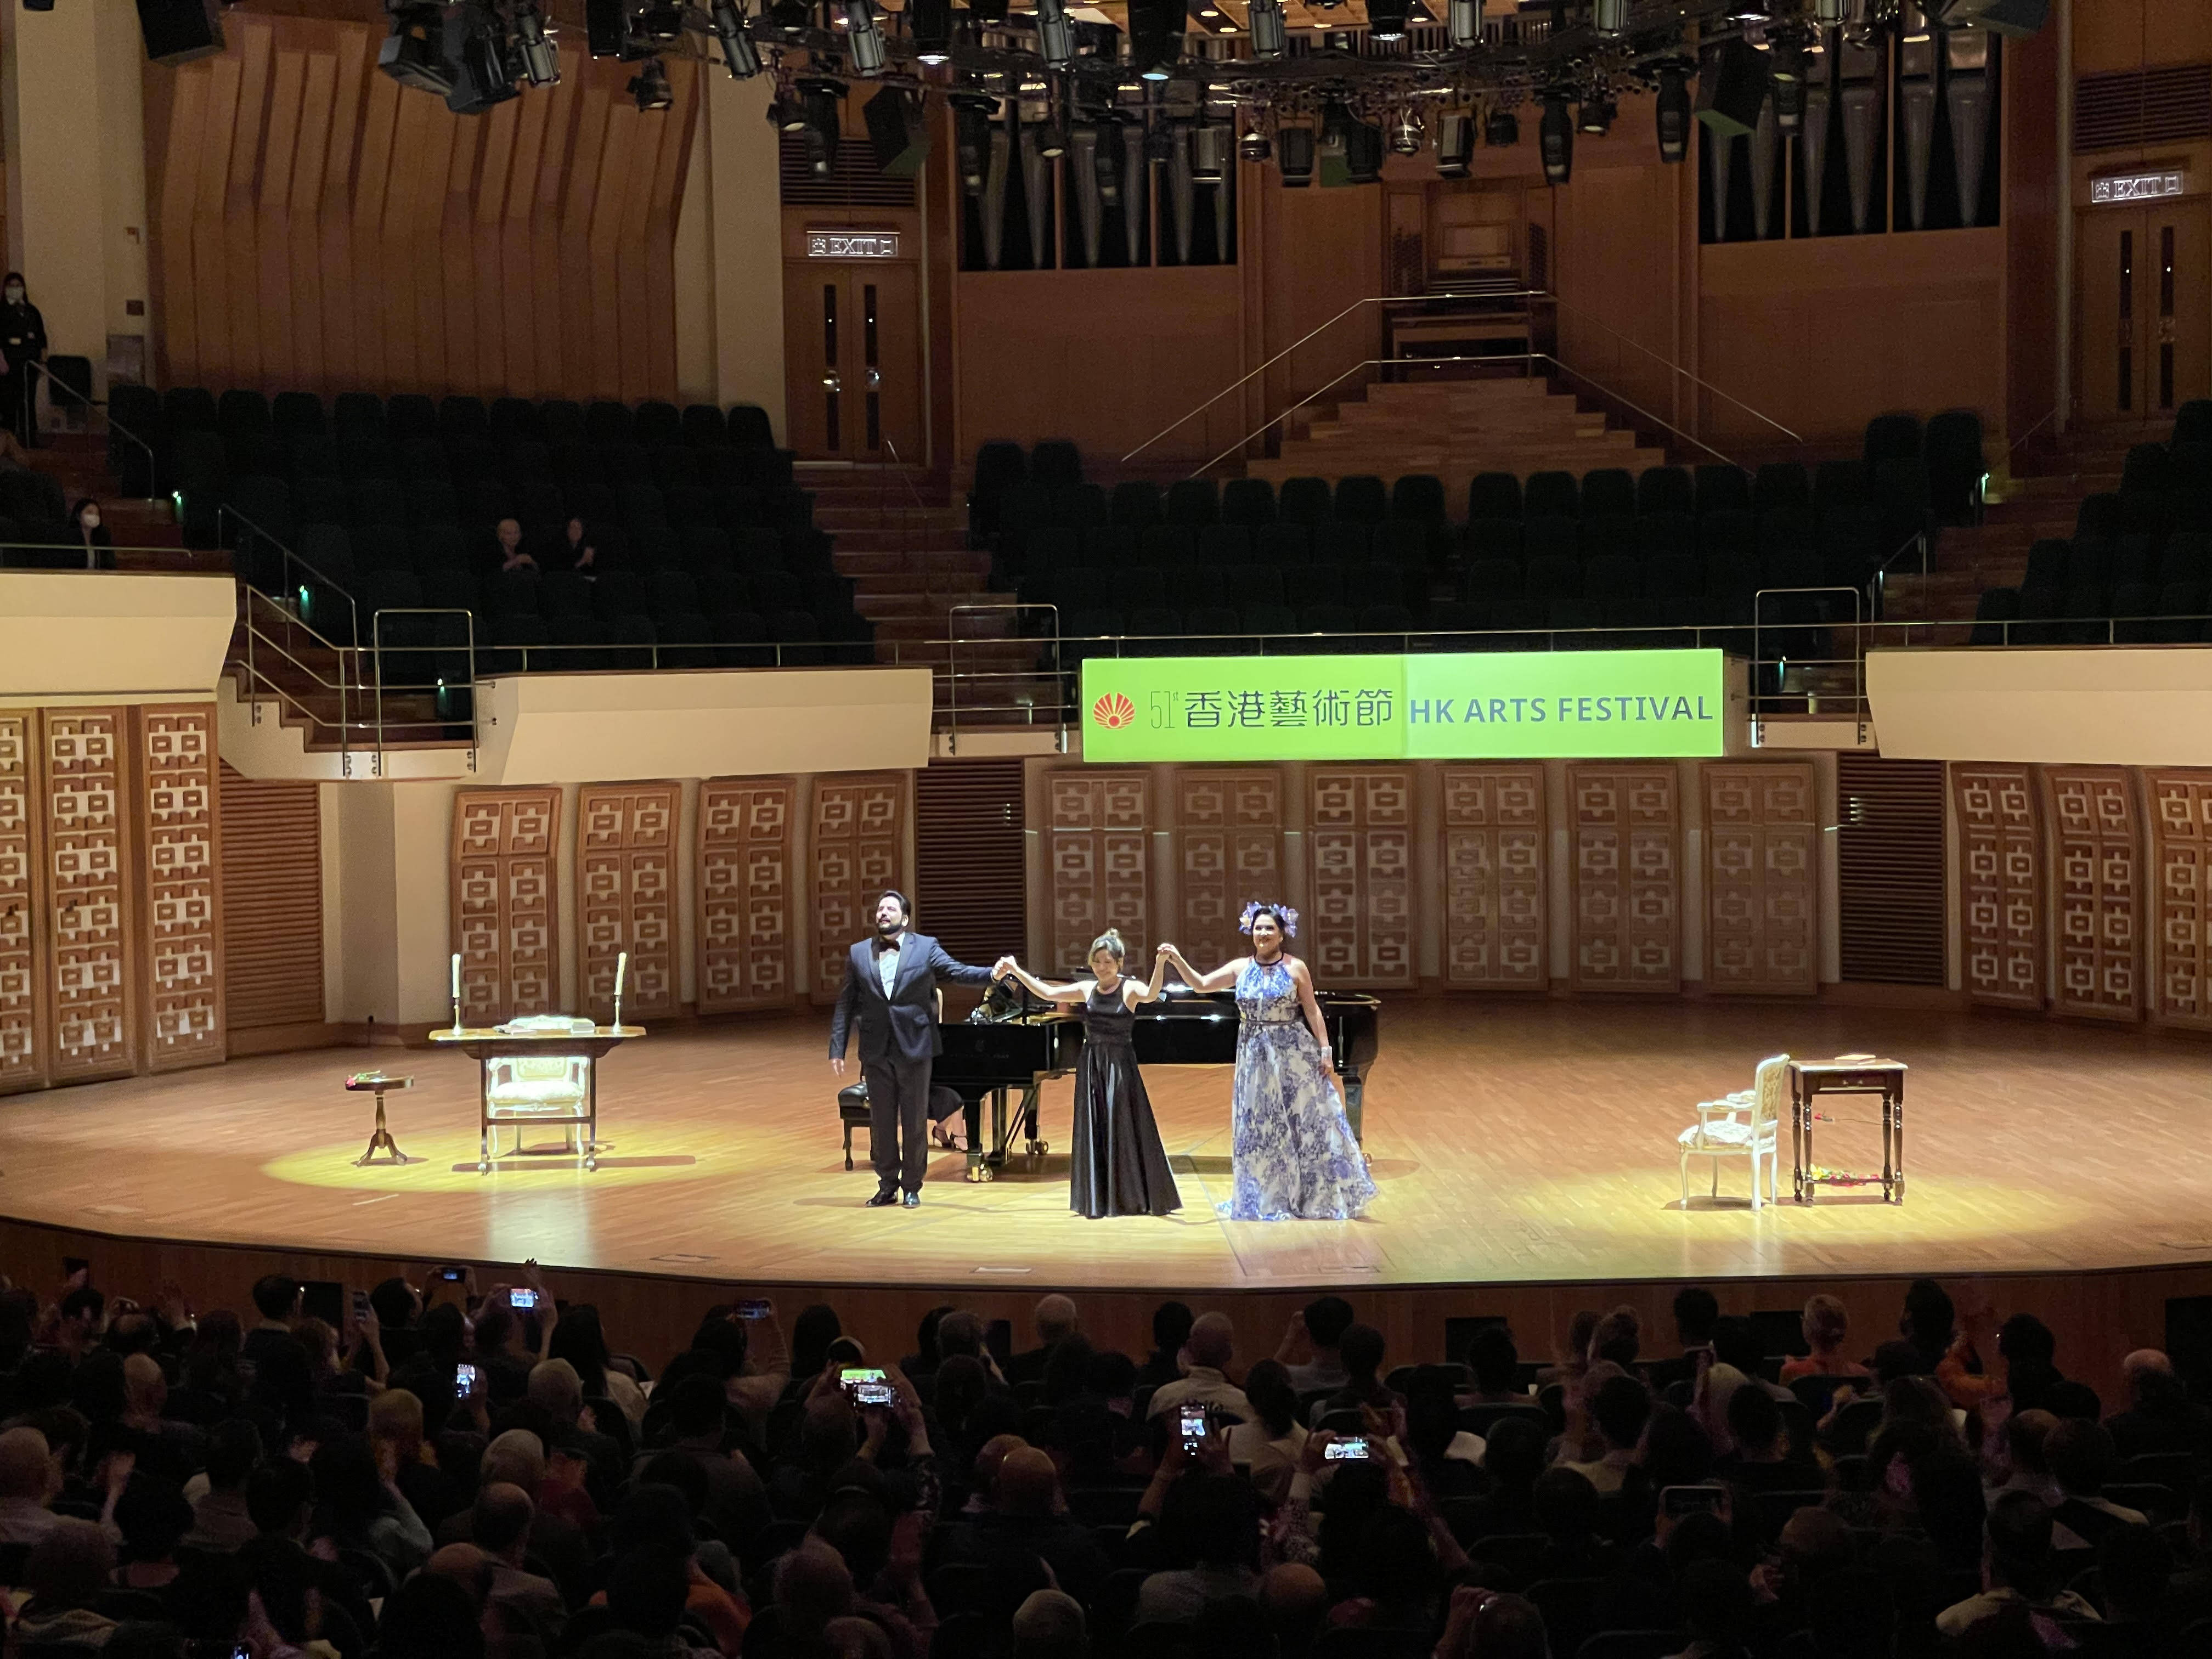 Russian soprano Anna Netrebko, her husband, Azerbaijani tenor Yusif Eyvazov and accompanist Rachel Cheung from Hong Kong receive the audience’s applause during their recital at the Hong Kong Cultural Centre Concert Hall on March 9. Photo: Hong Kong Arts Festival